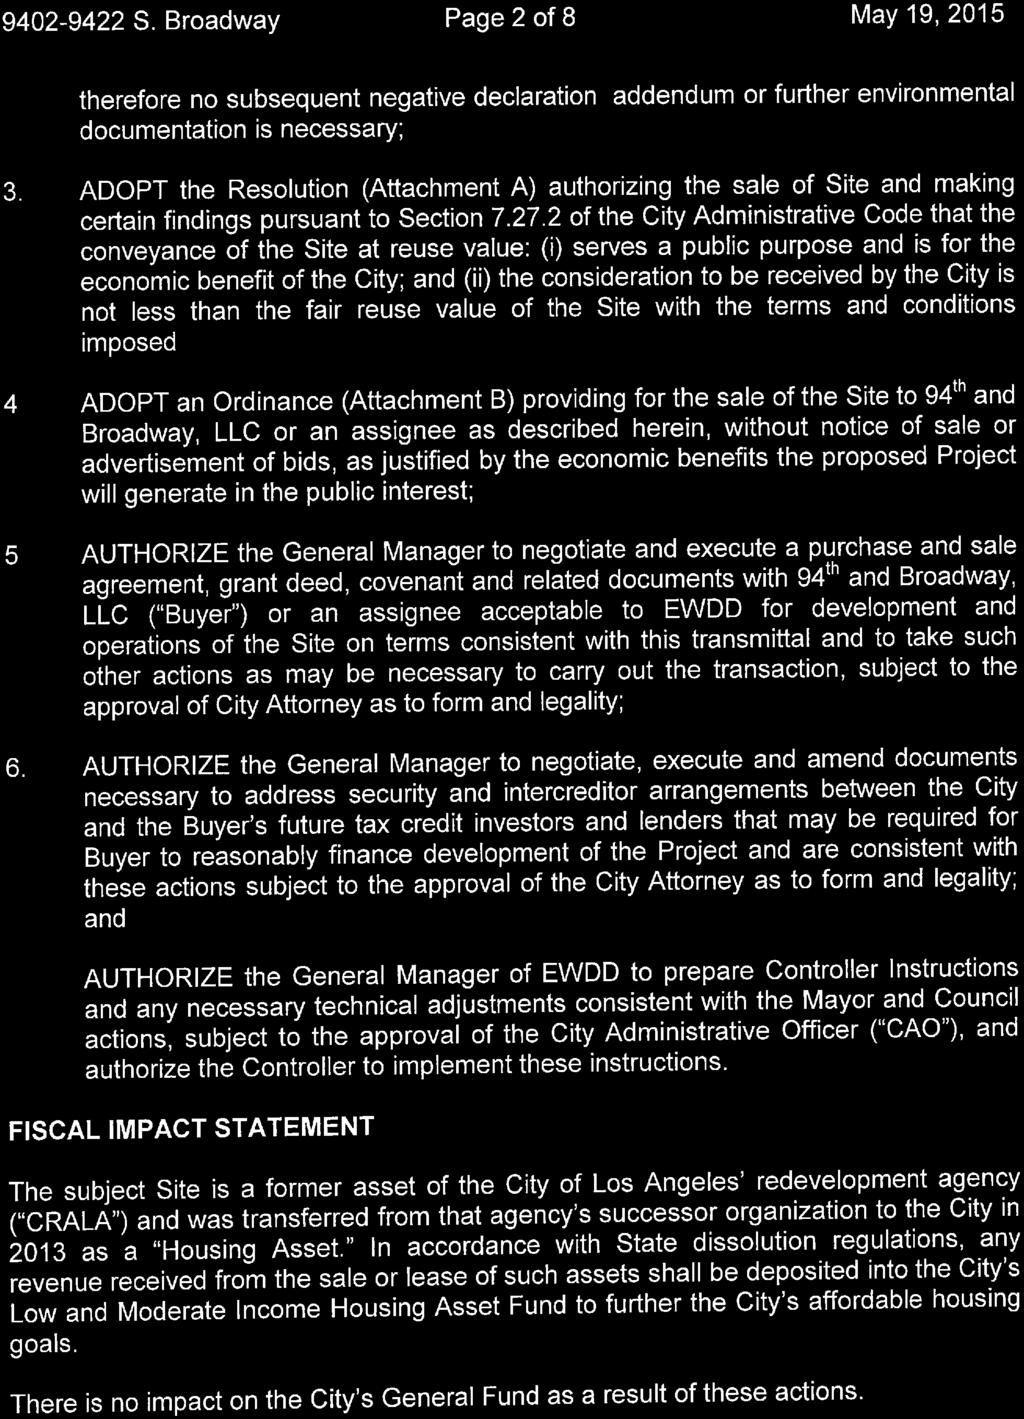 9402-9422 S. Broadway Page 2 of 8 May 19,2015 therefore no subsequent negative declaration, addendum or further environmental documentation is necessary; 3.